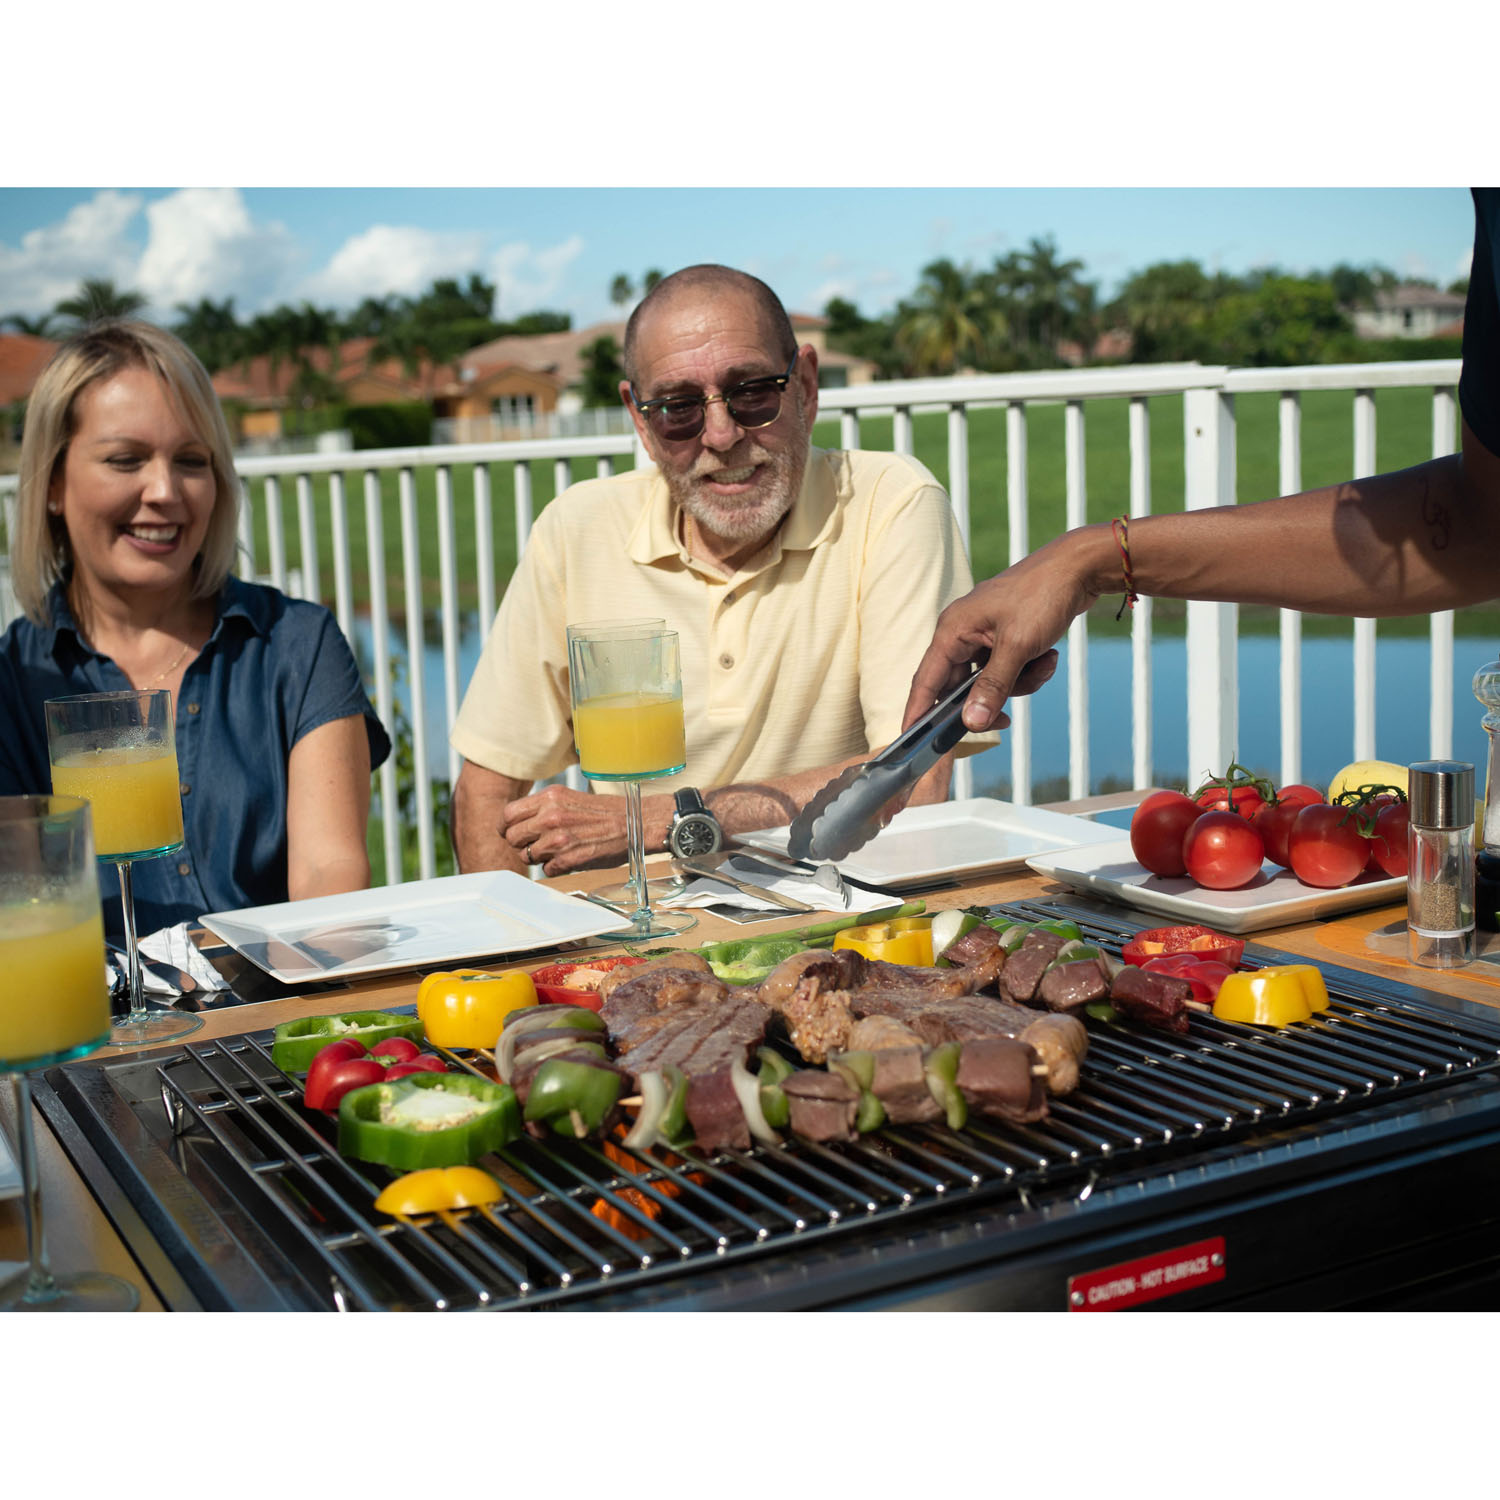 My Hibachi BBQ - Outdoor 3-in-1 Sit Around Grill w/ Flat Top Griddle, BBQ Rack and Cast Iron Burner - Portable for Tailgating - image 4 of 15